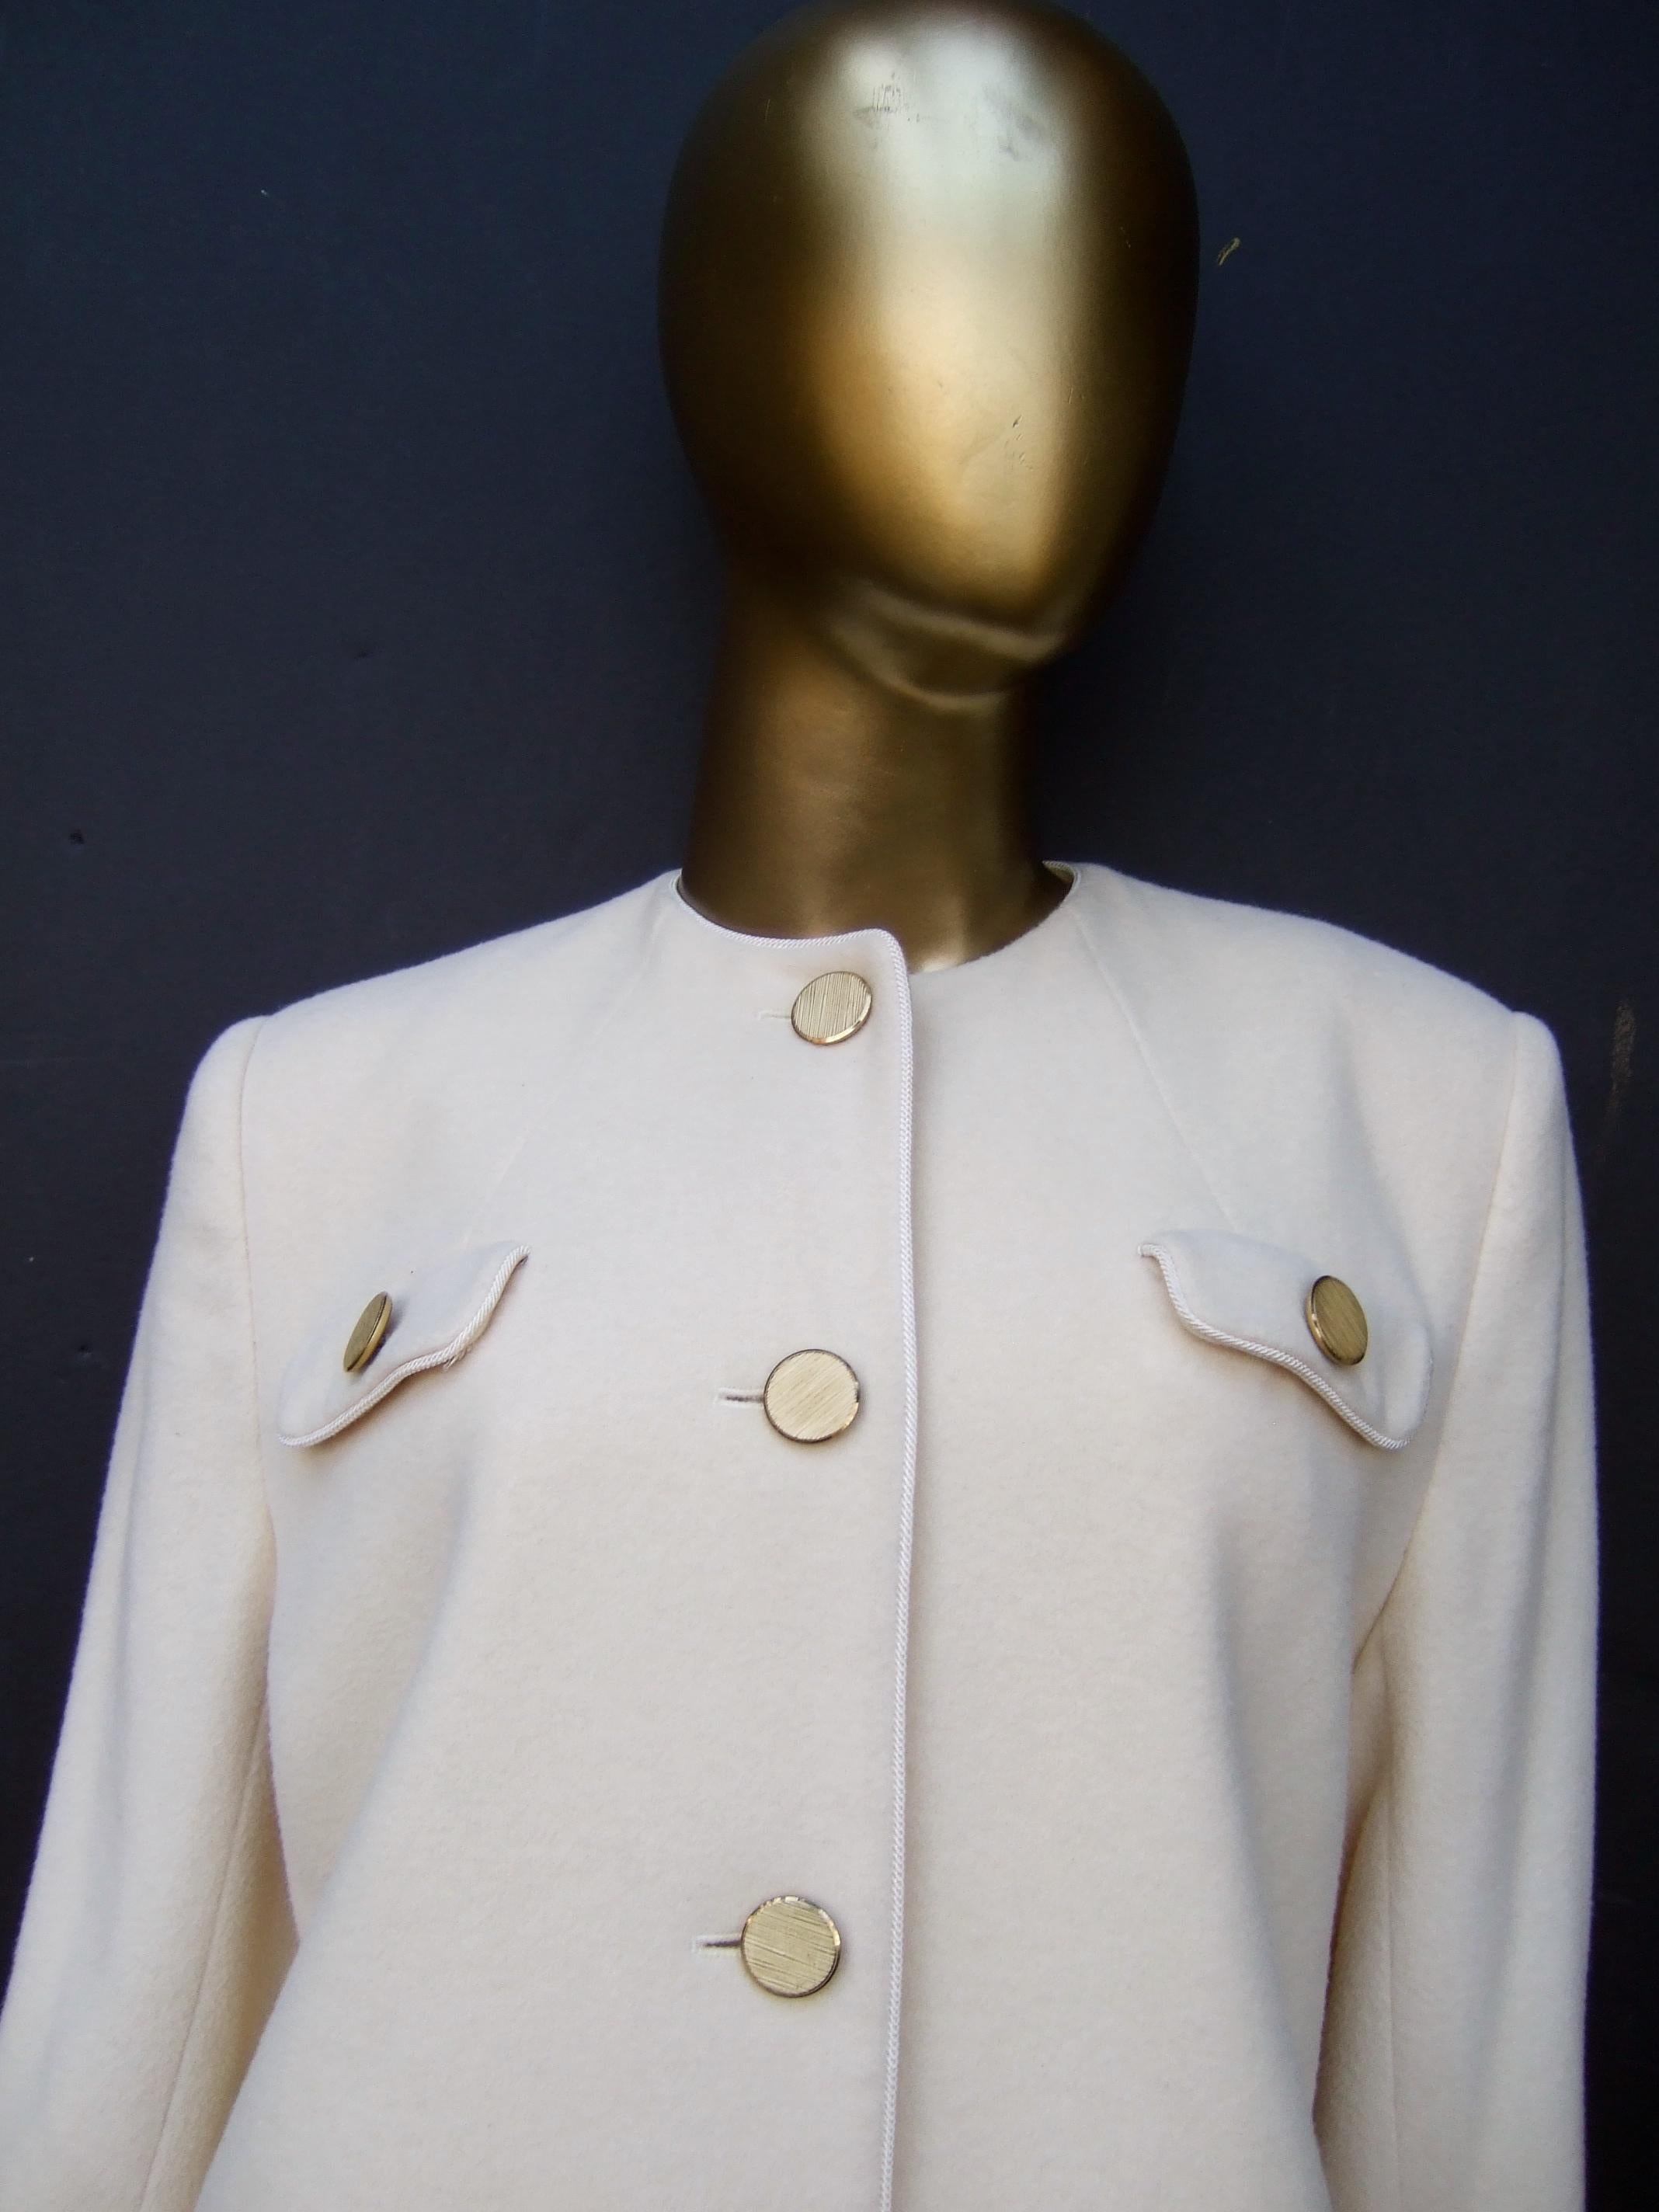 Luxurious Cashmere Creme Winter White Coat by Montaldo's c 1970s  In Good Condition For Sale In University City, MO